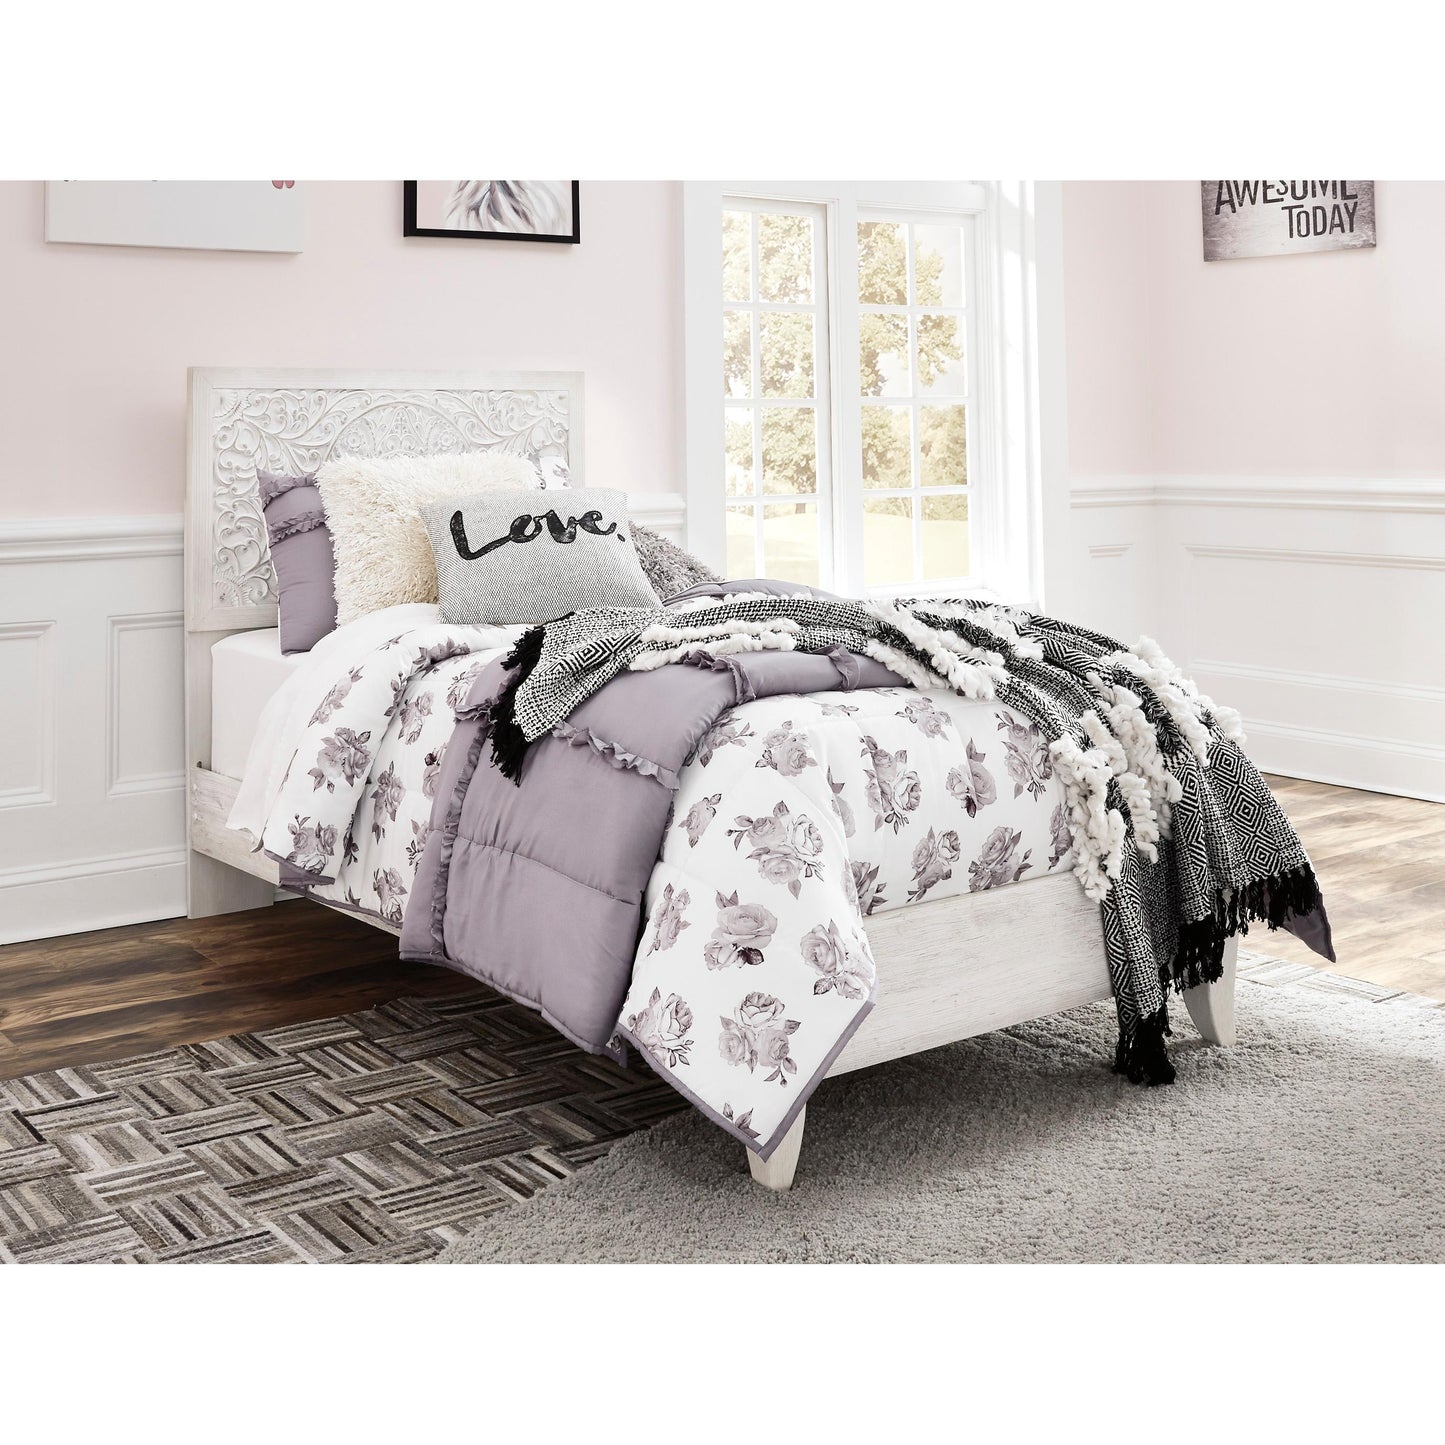 Signature Design by Ashley Paxberry B181B24 5 pc Twin Panel Bedroom Set IMAGE 2